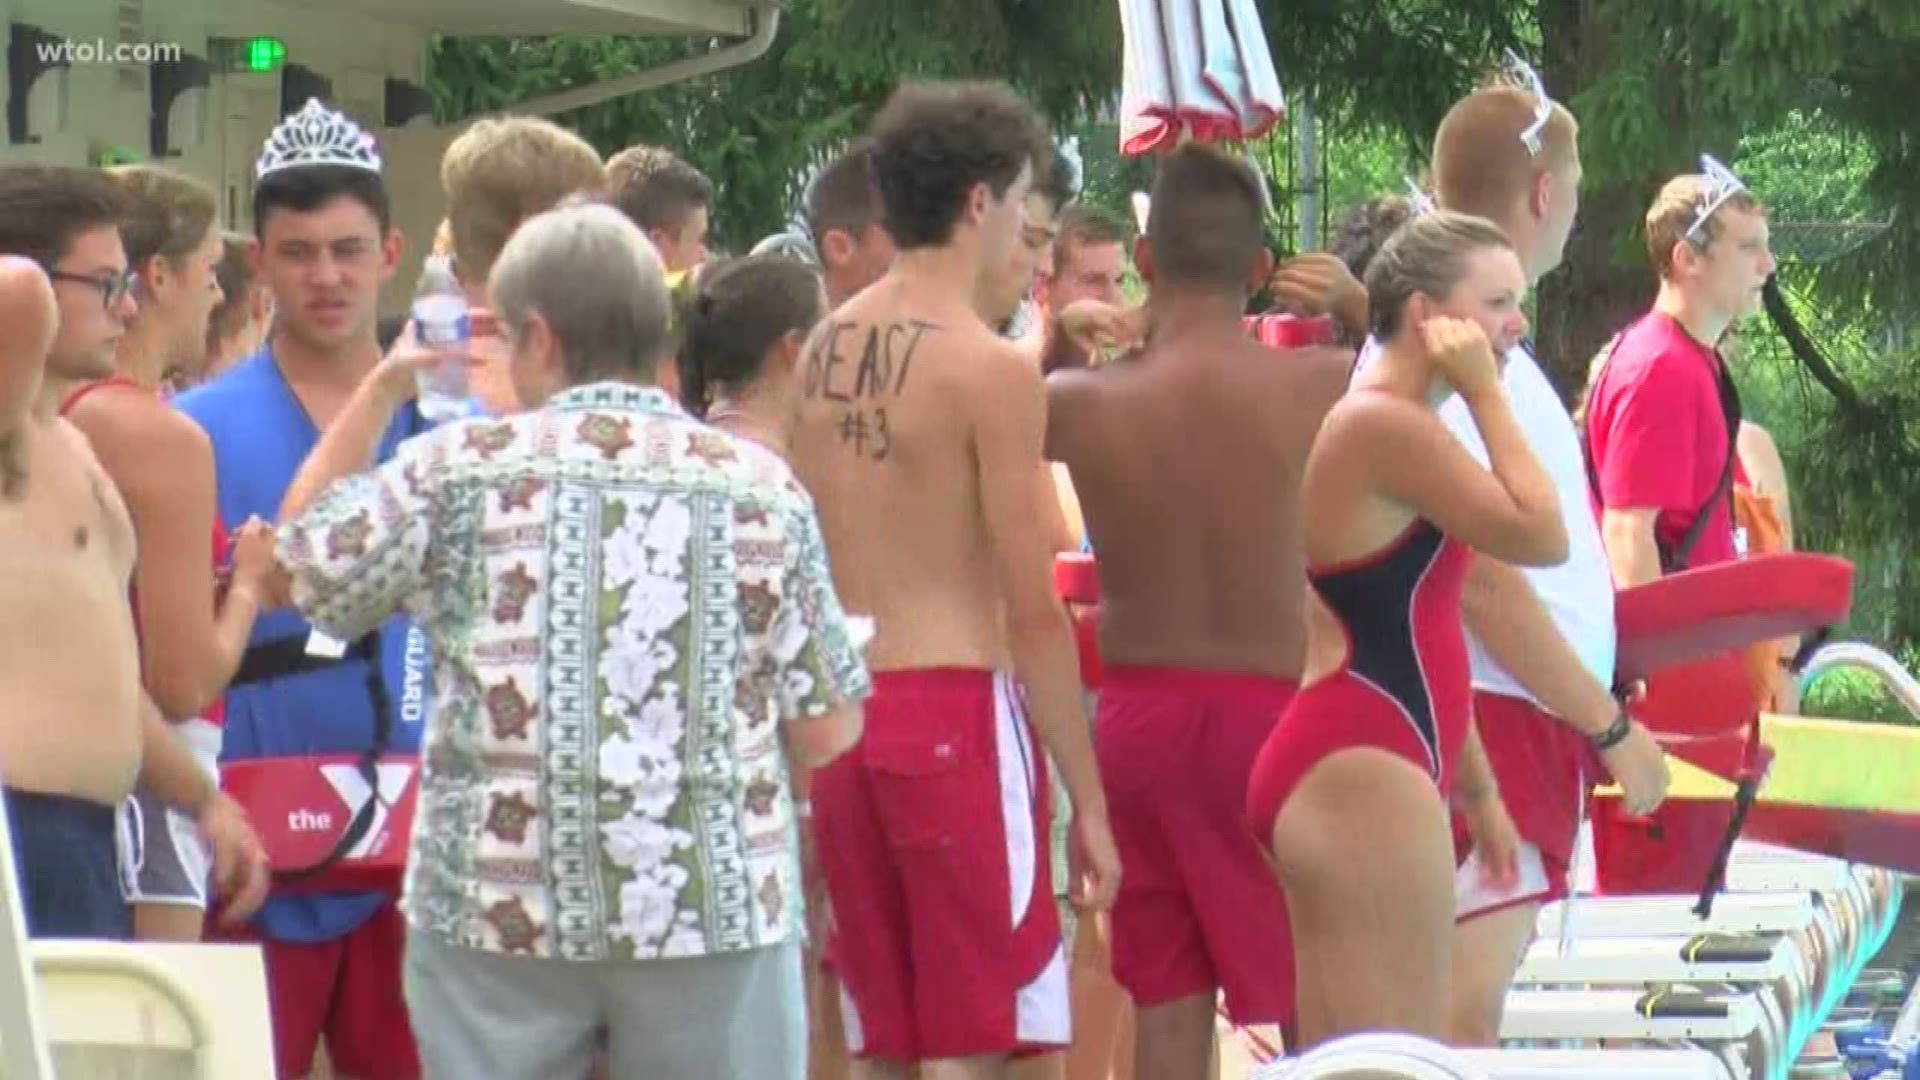 Lifeguards from the Greater Toledo YMCA locations and a few Michigan YMCAs spent the day competing in the event that has gone on for more than 20 years.